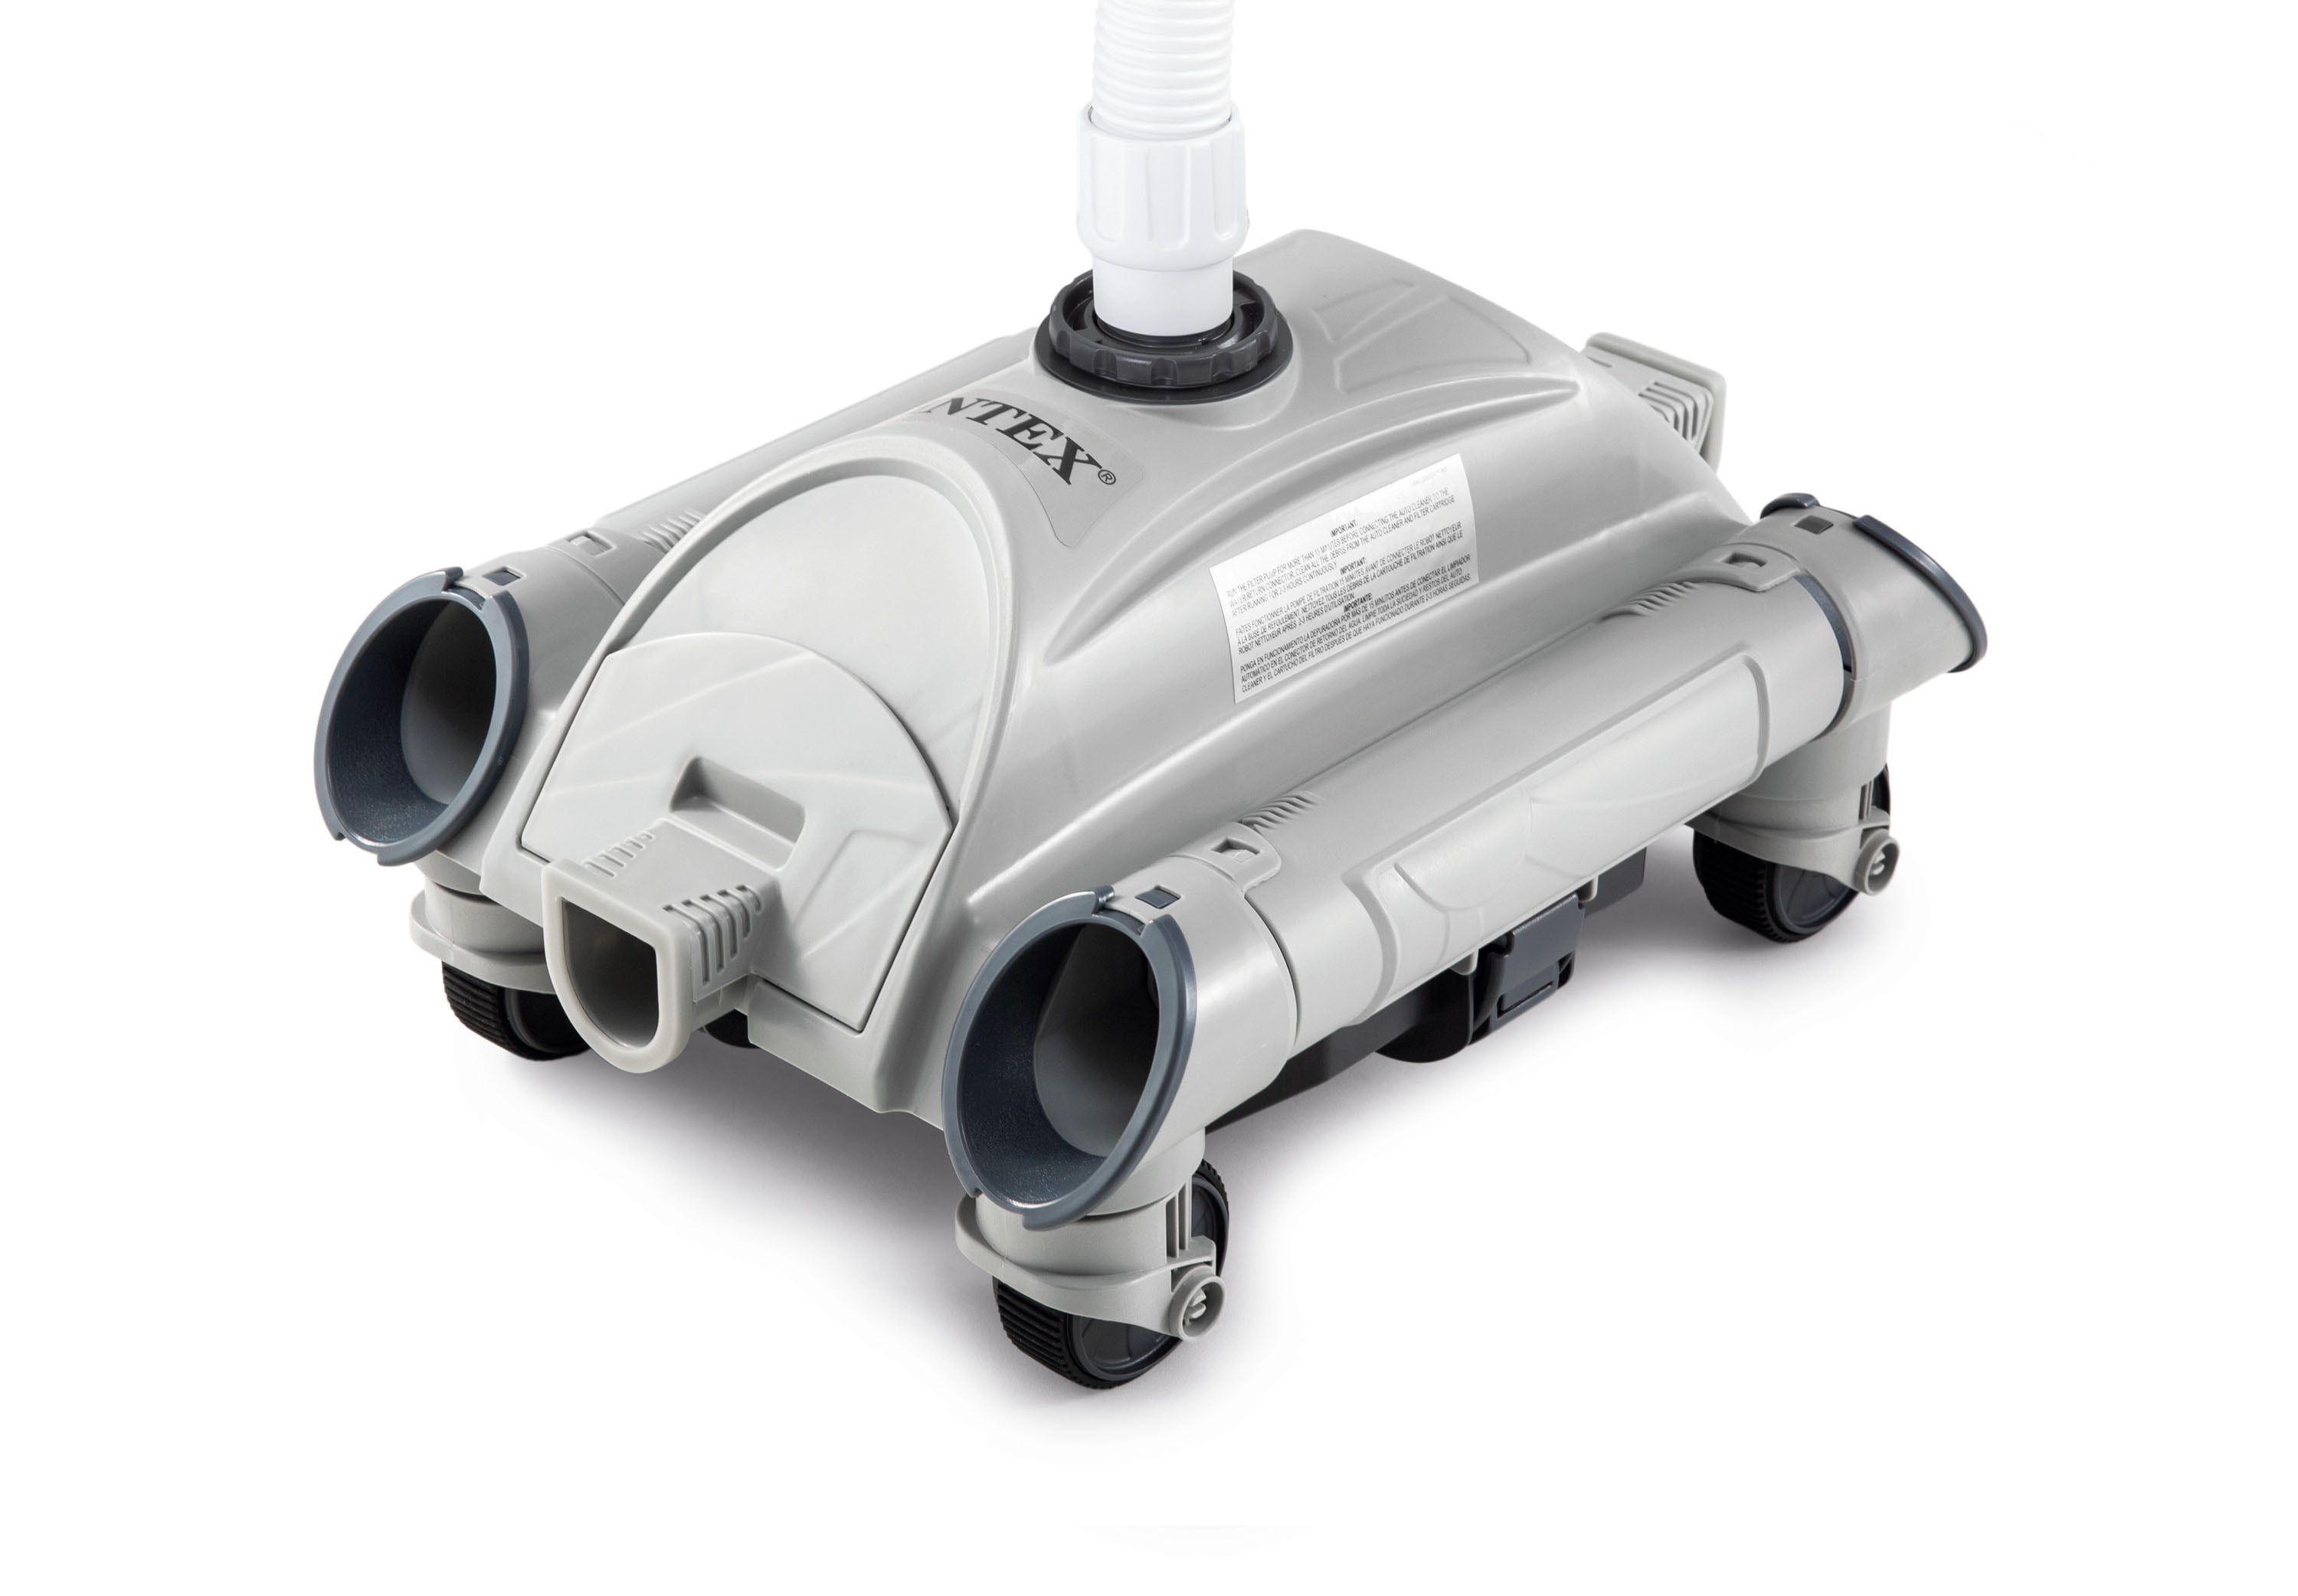 Modern Intex Automatic Above Ground Swimming Pool Vacuum Cleaner for Small Space